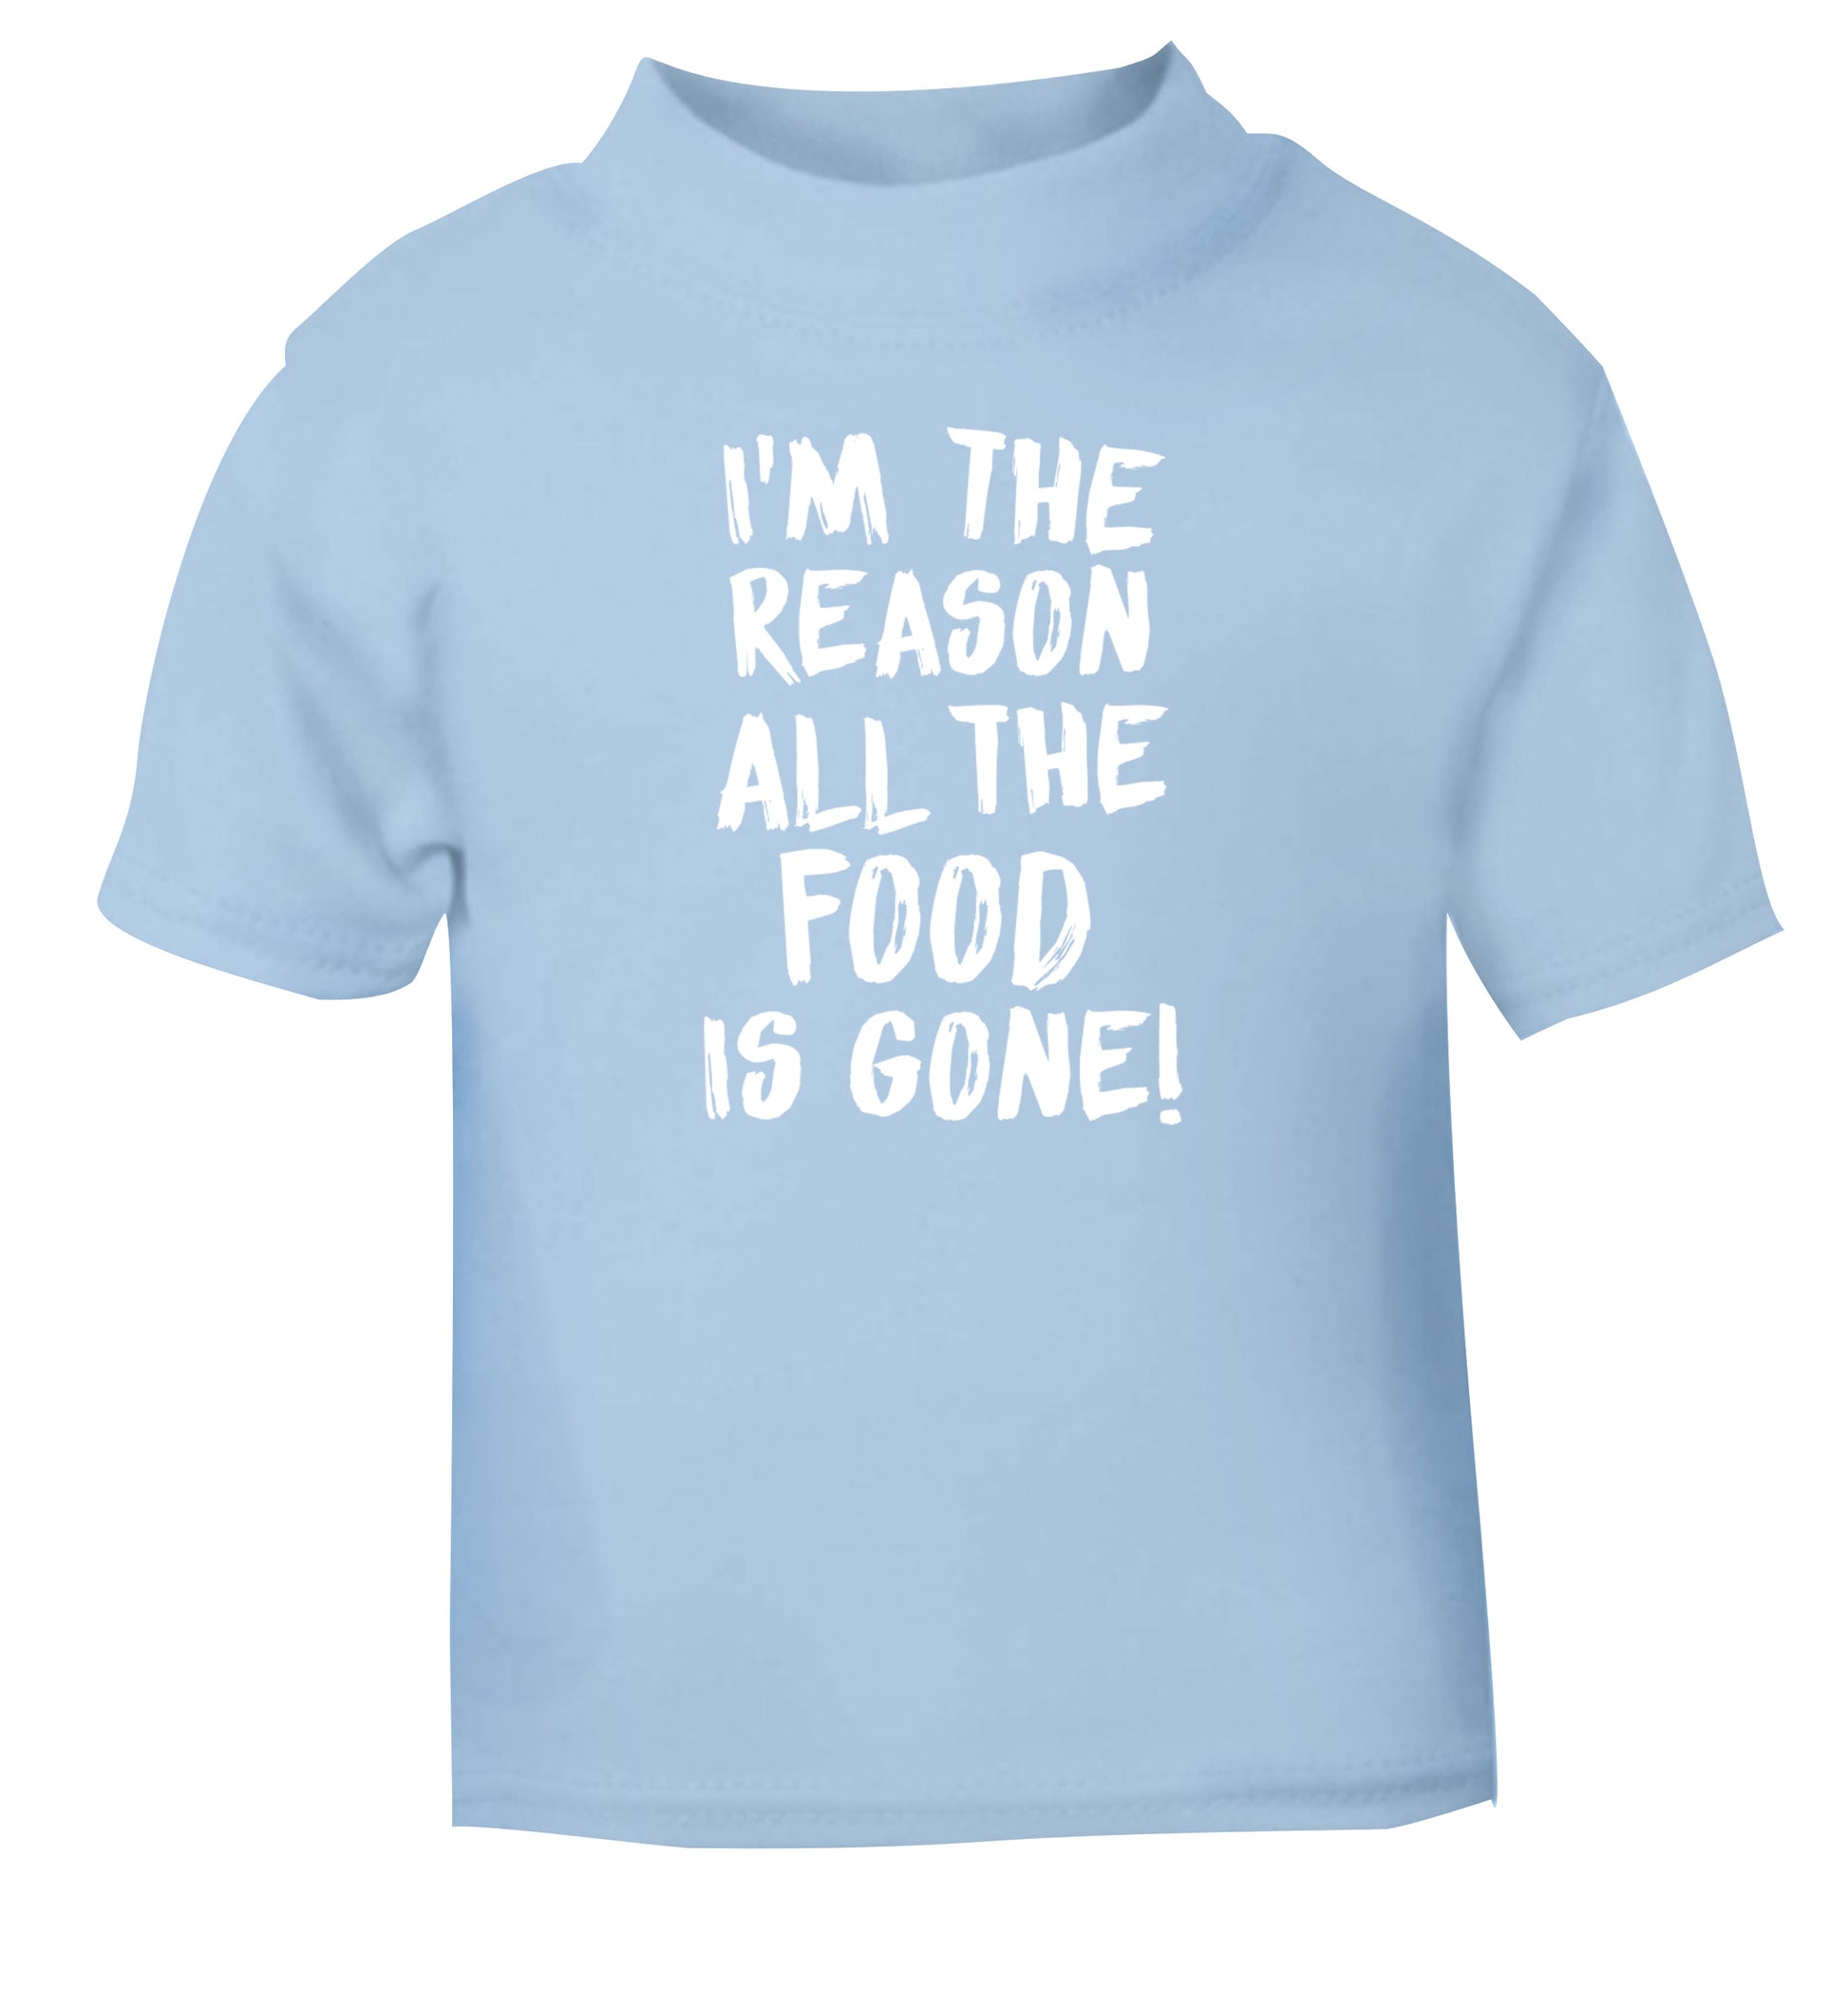 I'm the reason why all the food is gone light blue Baby Toddler Tshirt 2 Years